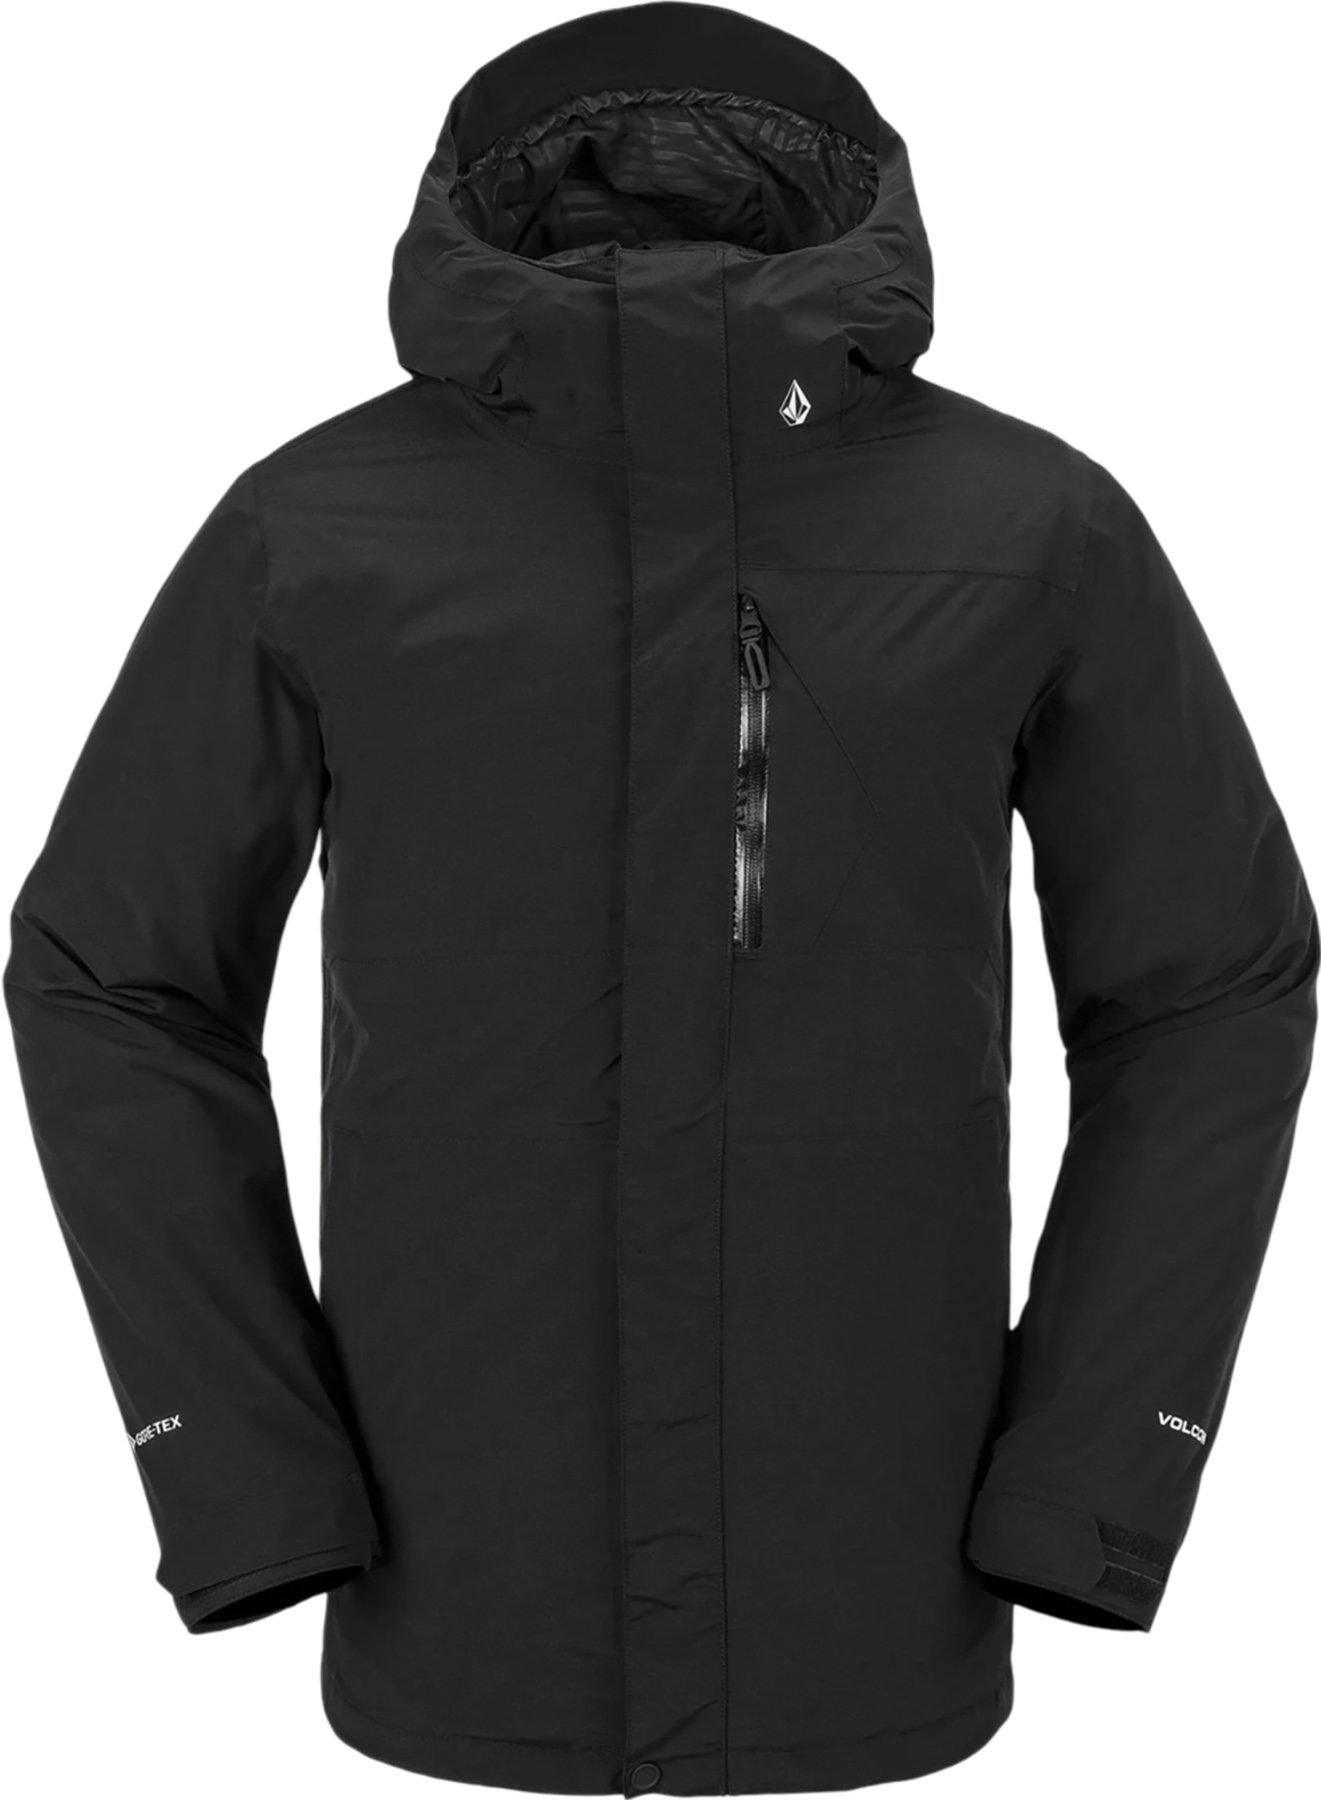 Product image for L GORE-TEX Jacket - Men's